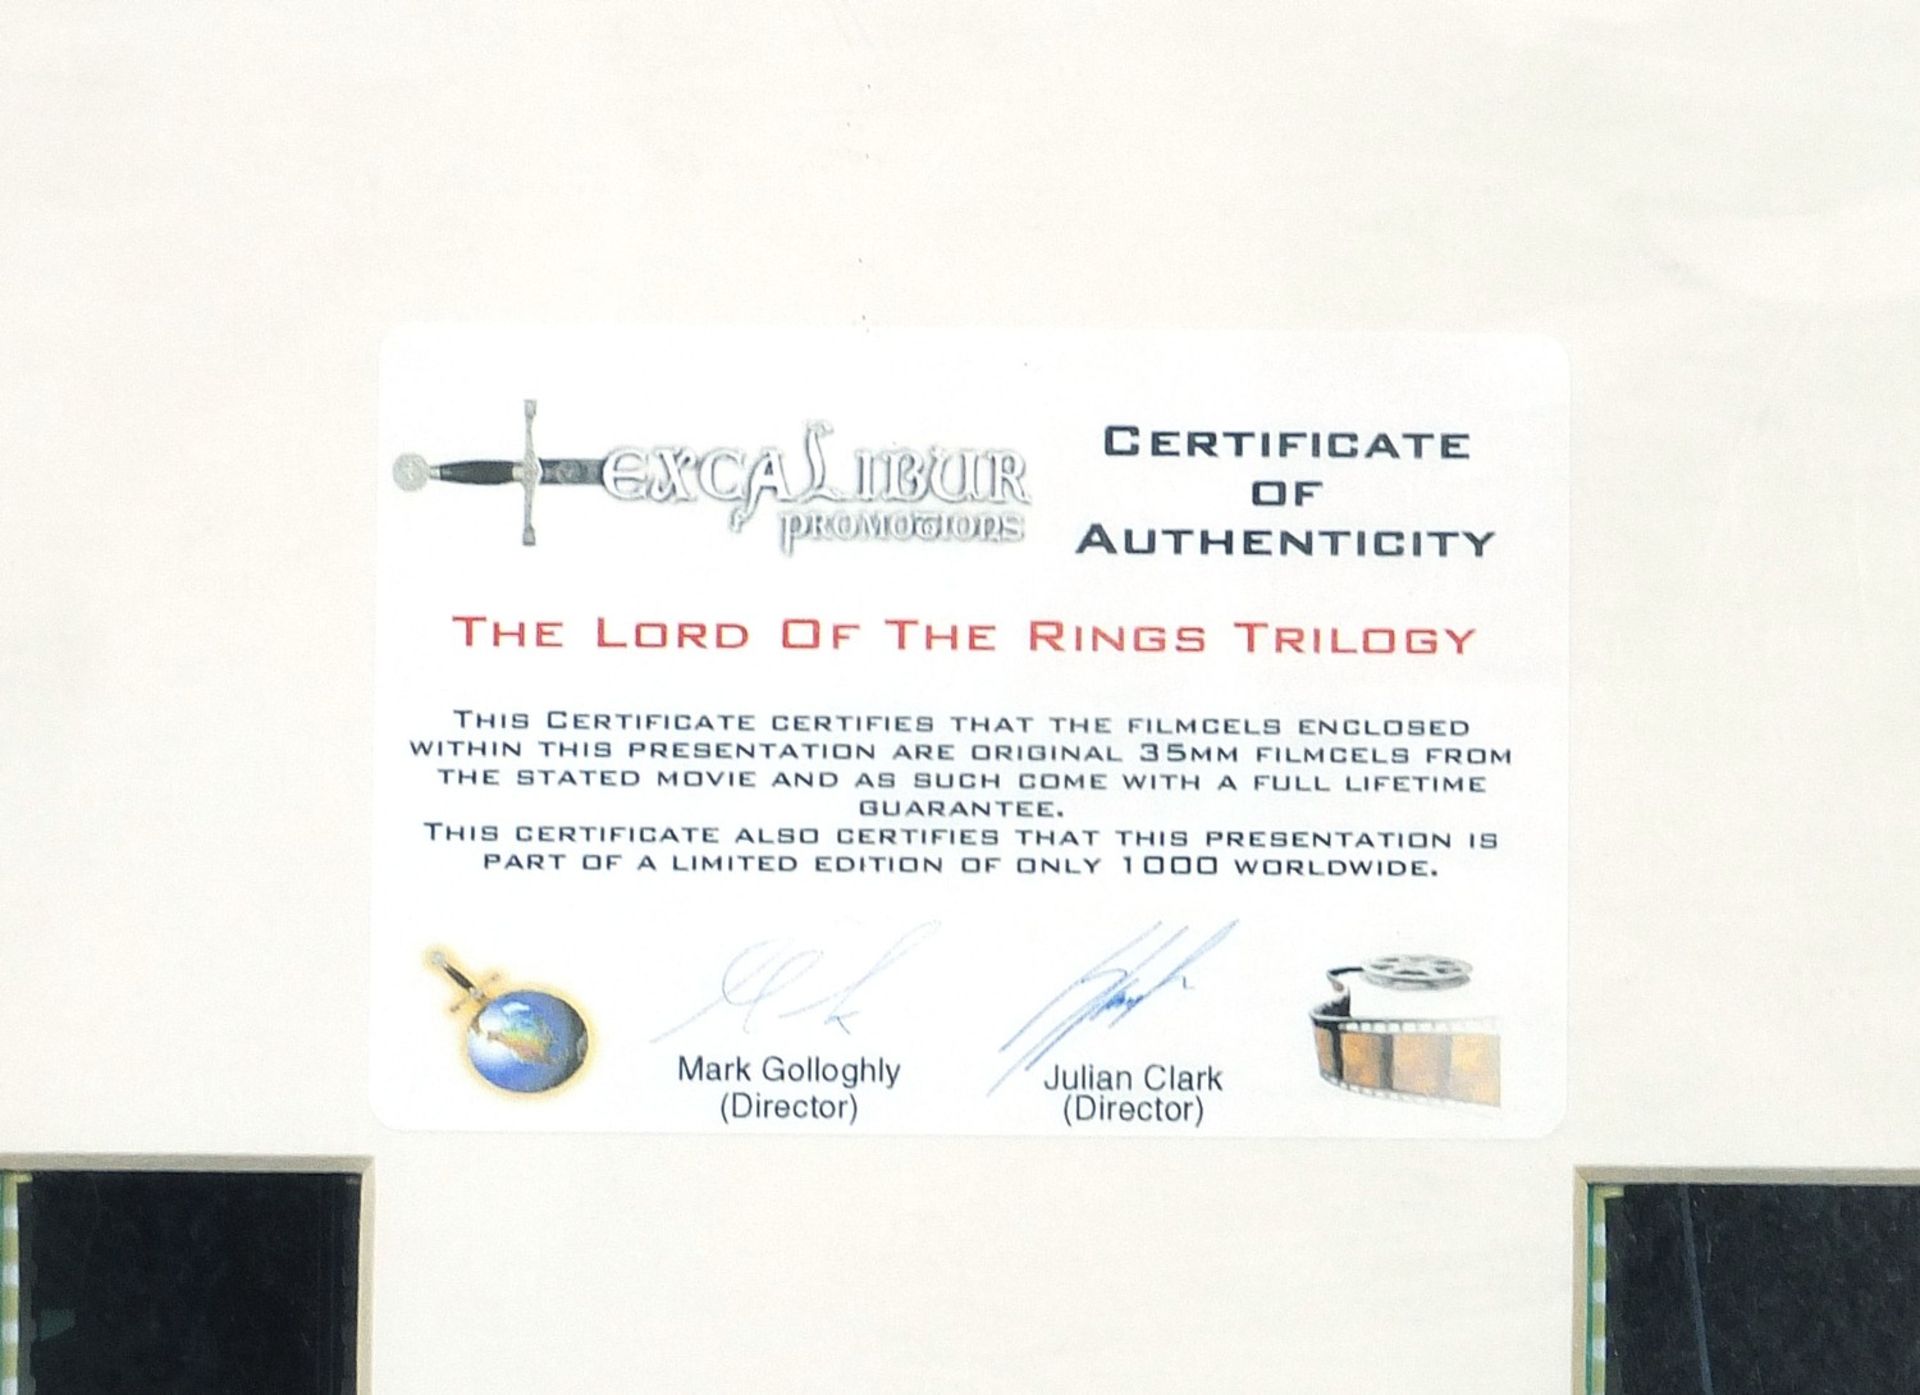 Lord of the Rings trilogy filmcell display, limited edition 583/1000, certificate of authenticity - Image 5 of 5